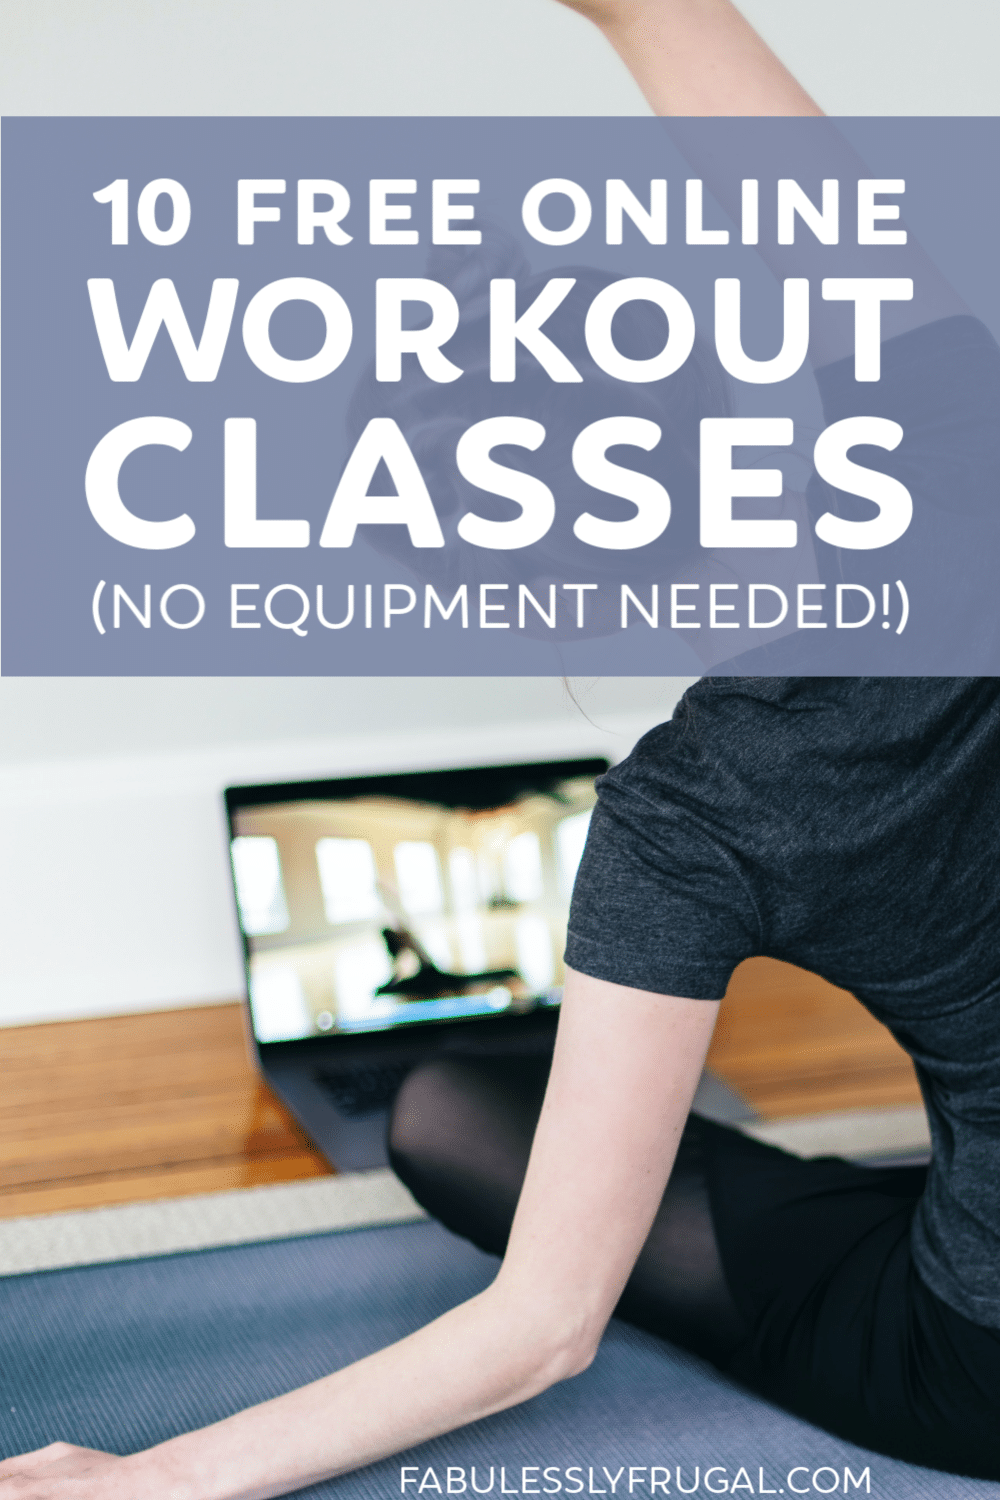 Free online workout classes